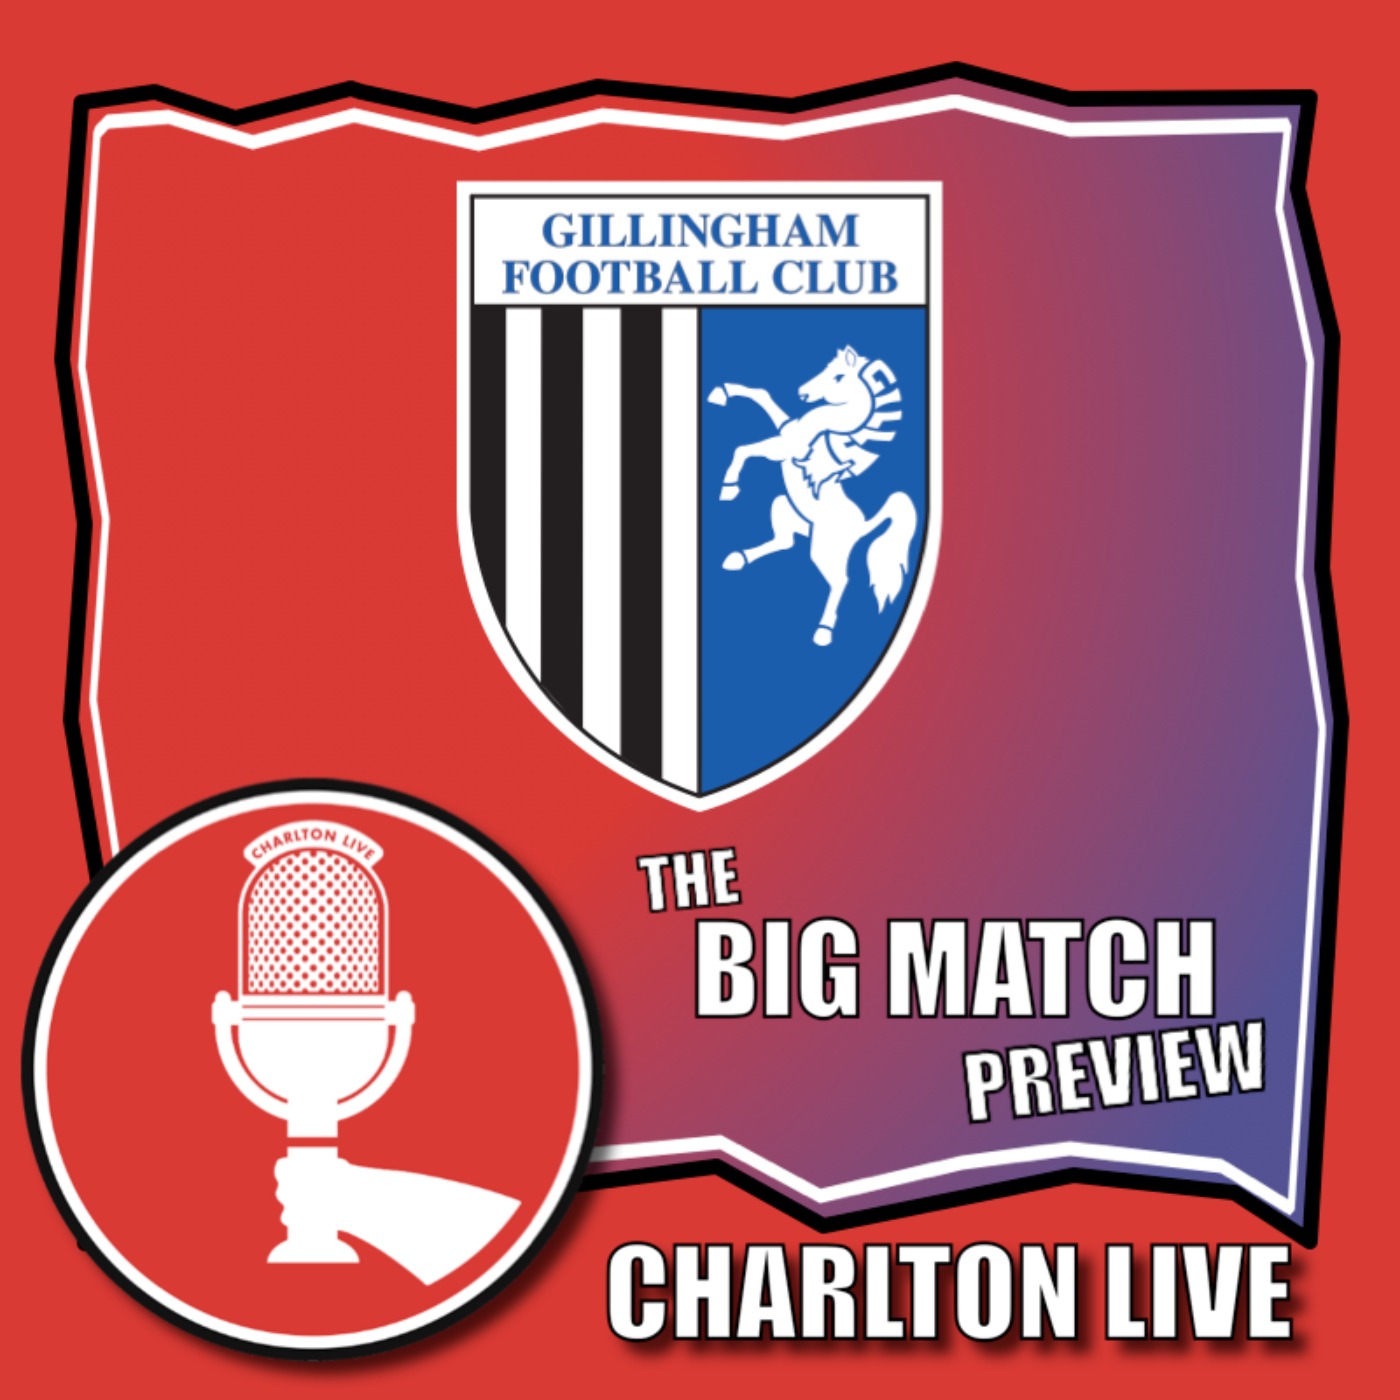 cover art for ALFIE MAY DOUBLE SINKS CHELTENHAM - FA CUP GILLS SCAFFOLD UP NEXT | Big Match Preview Gillingham